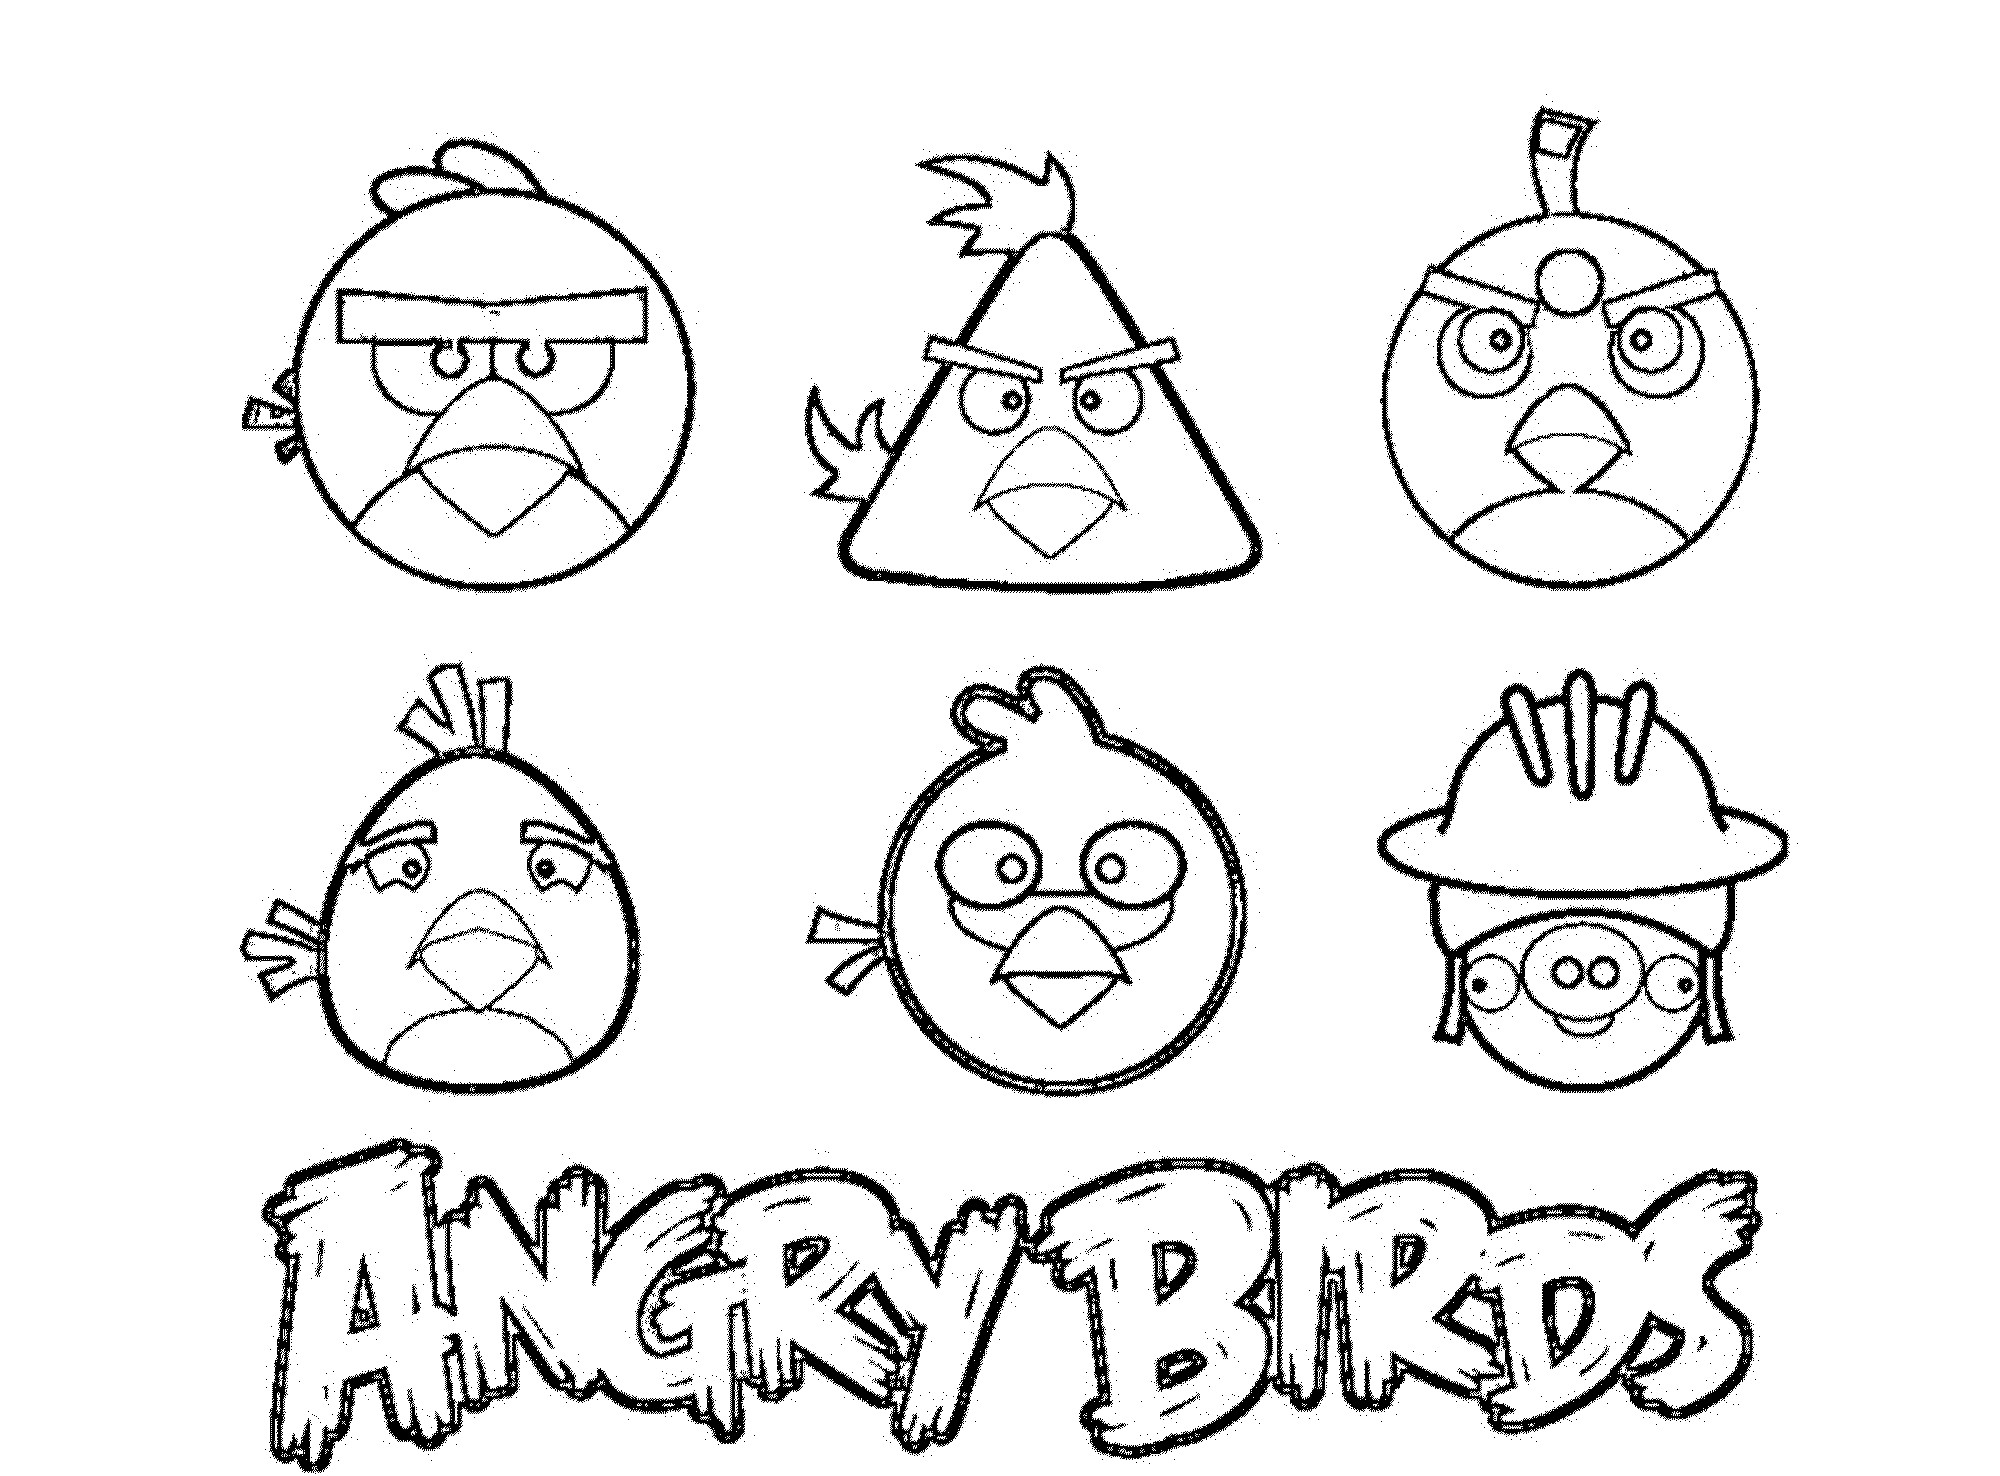 Angry Bird Printable Coloring Pages
 Angry Birds Coloring Pages for Your Small Kids